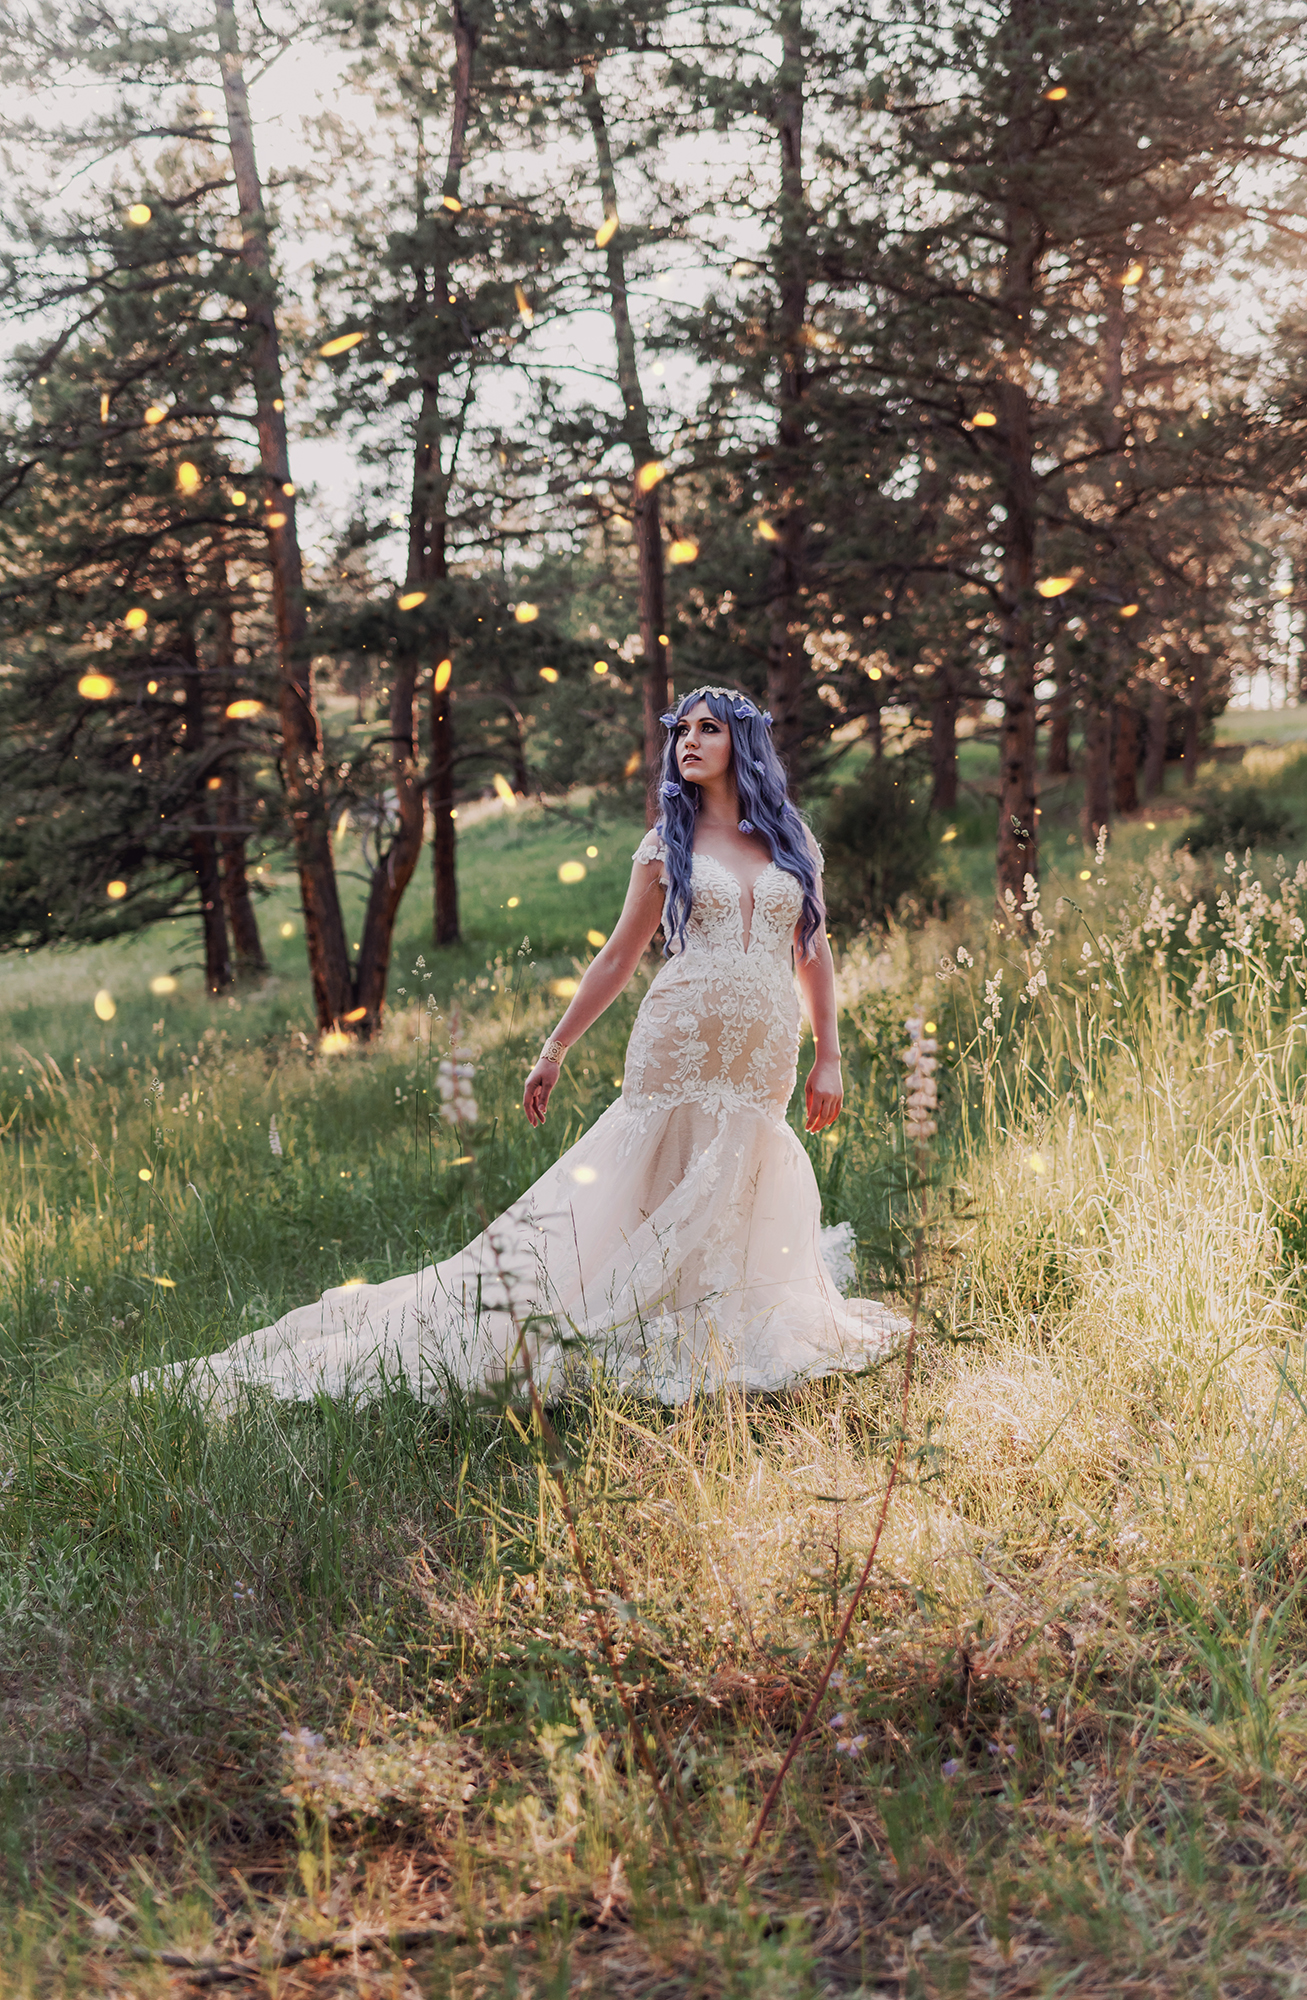 Kendra Colleen Photography takes fantasy bridal portrait of a woman with purple hair, wearing a wedding dress standing in a field in a woodland area of Boulder Colorado.